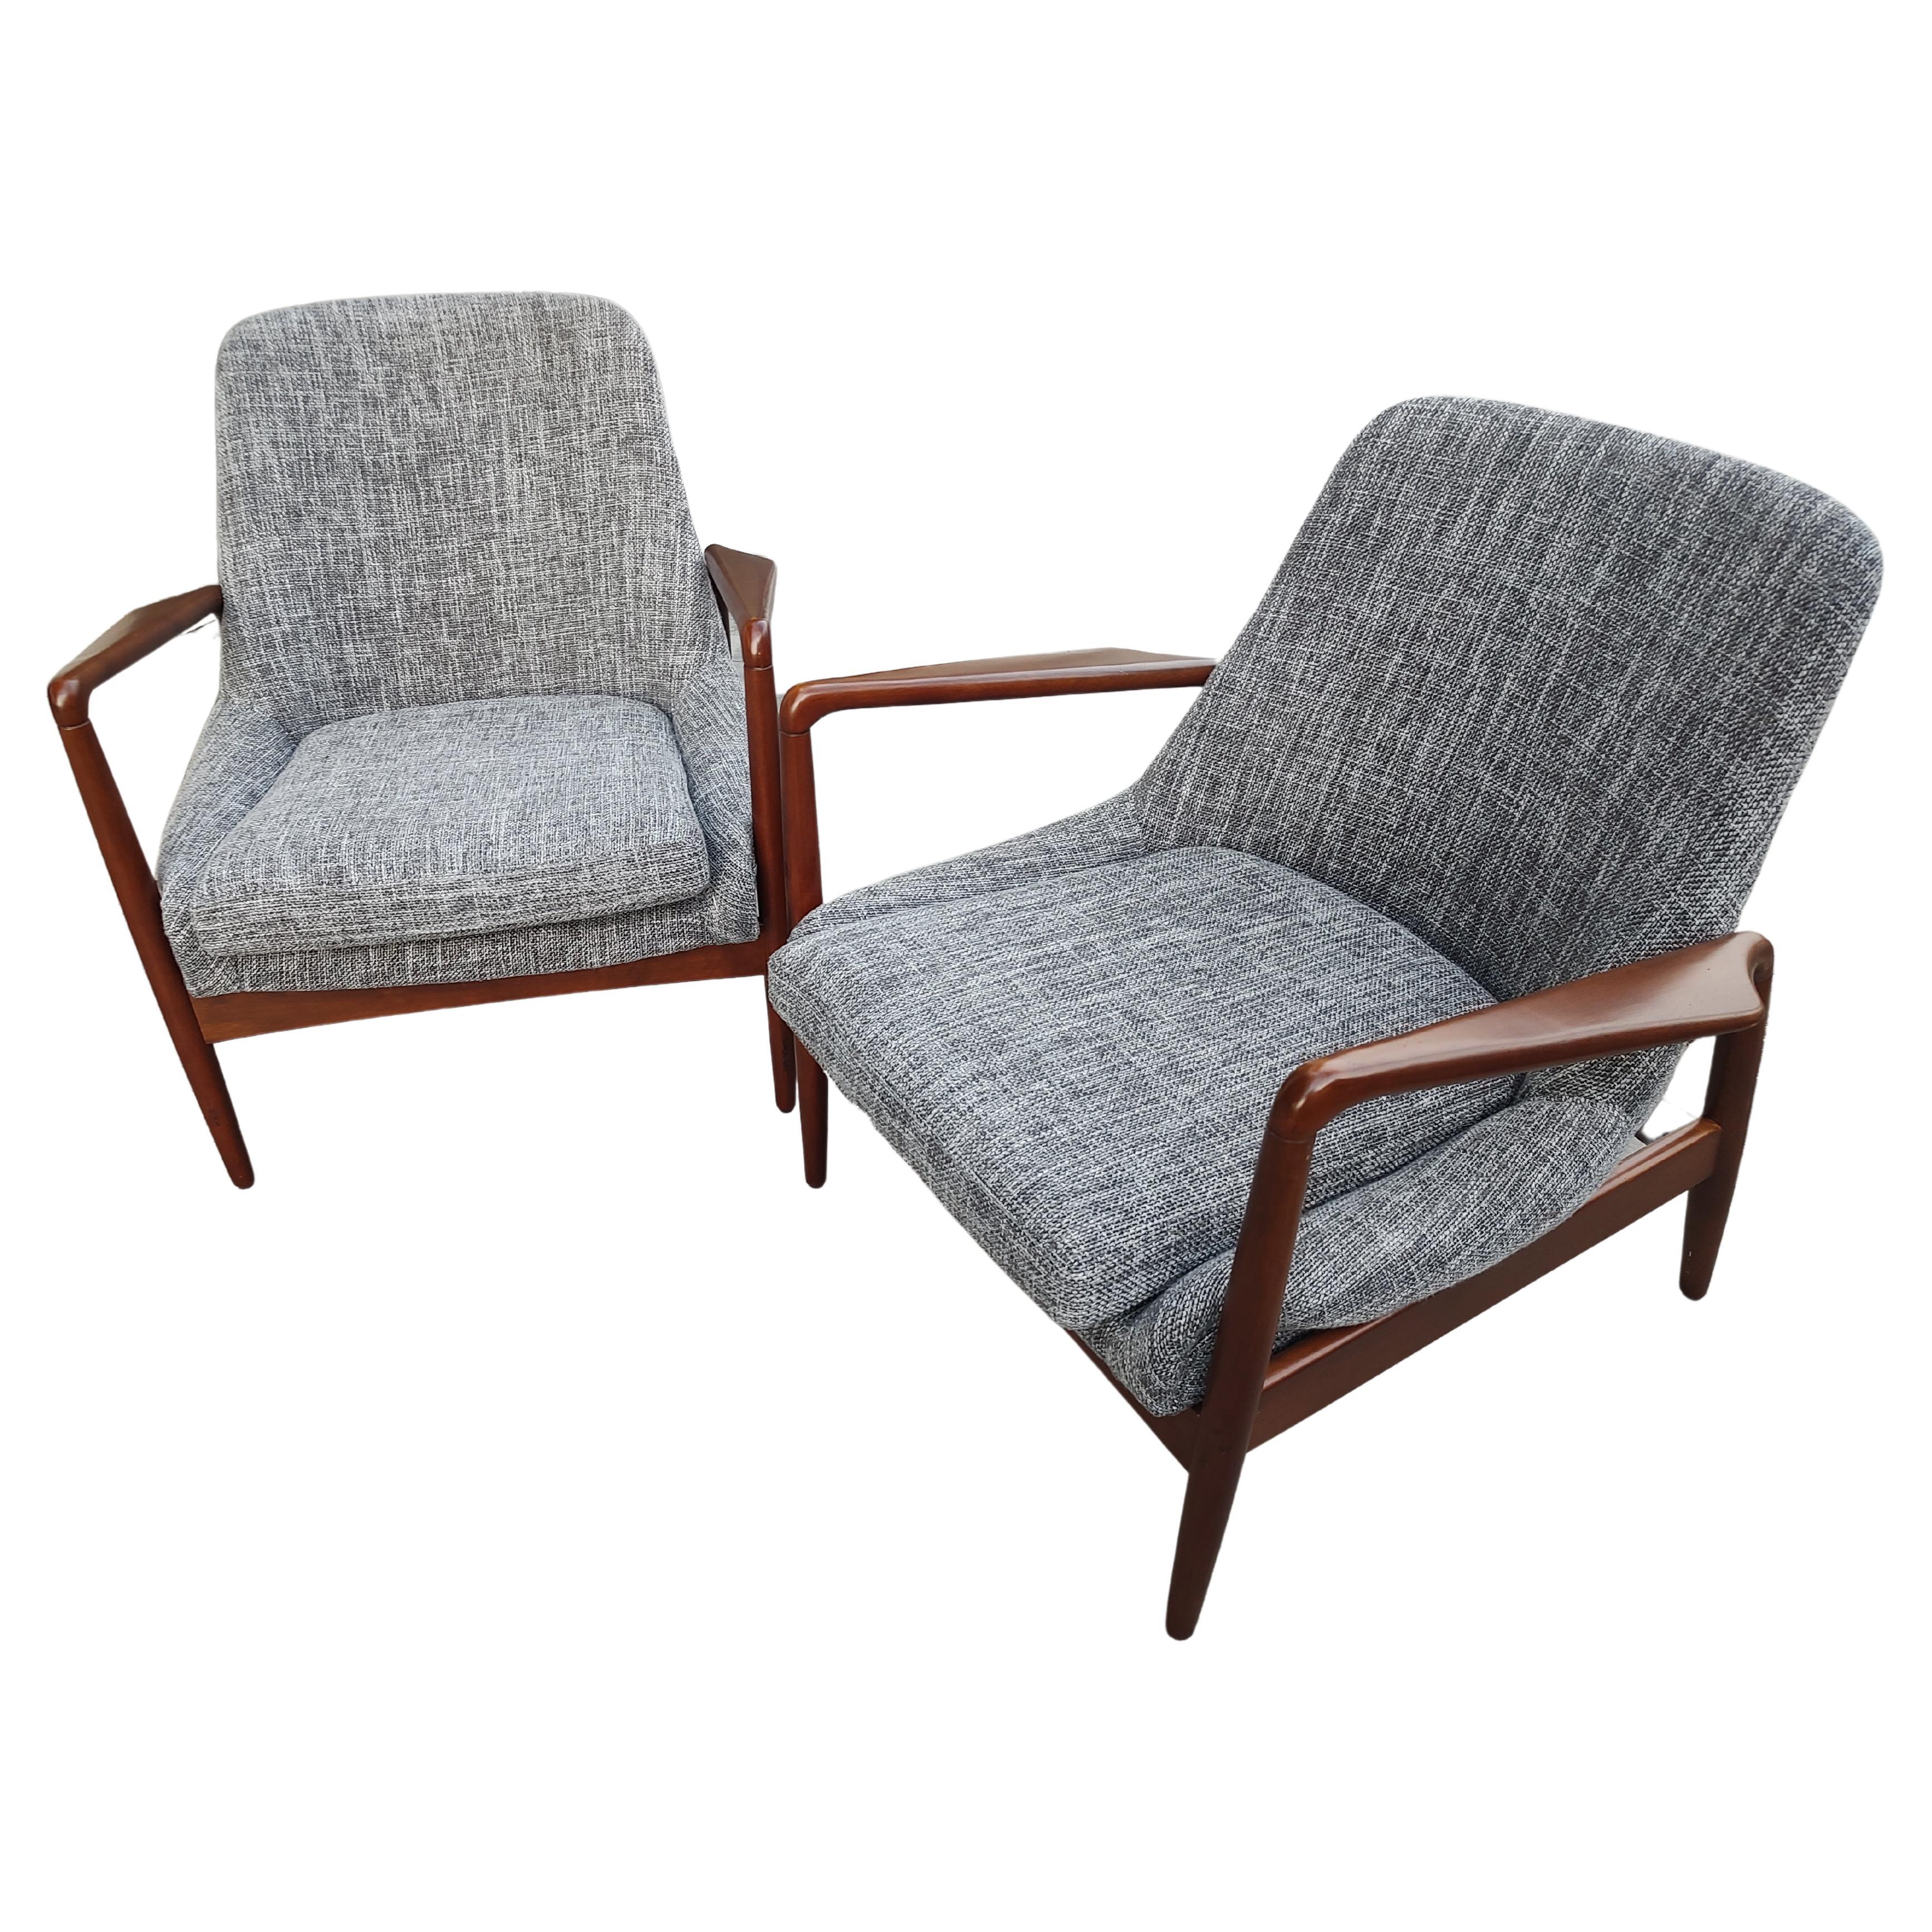 Fantastic pair of Mid Century Modern lounge chairs in a fab fabric reminiscing the fifties. Beautiful color in a tweed fabric. Sculptural arms with great lines on these chairs
 Some nicks to the finish on front legs which we will have corrected, see